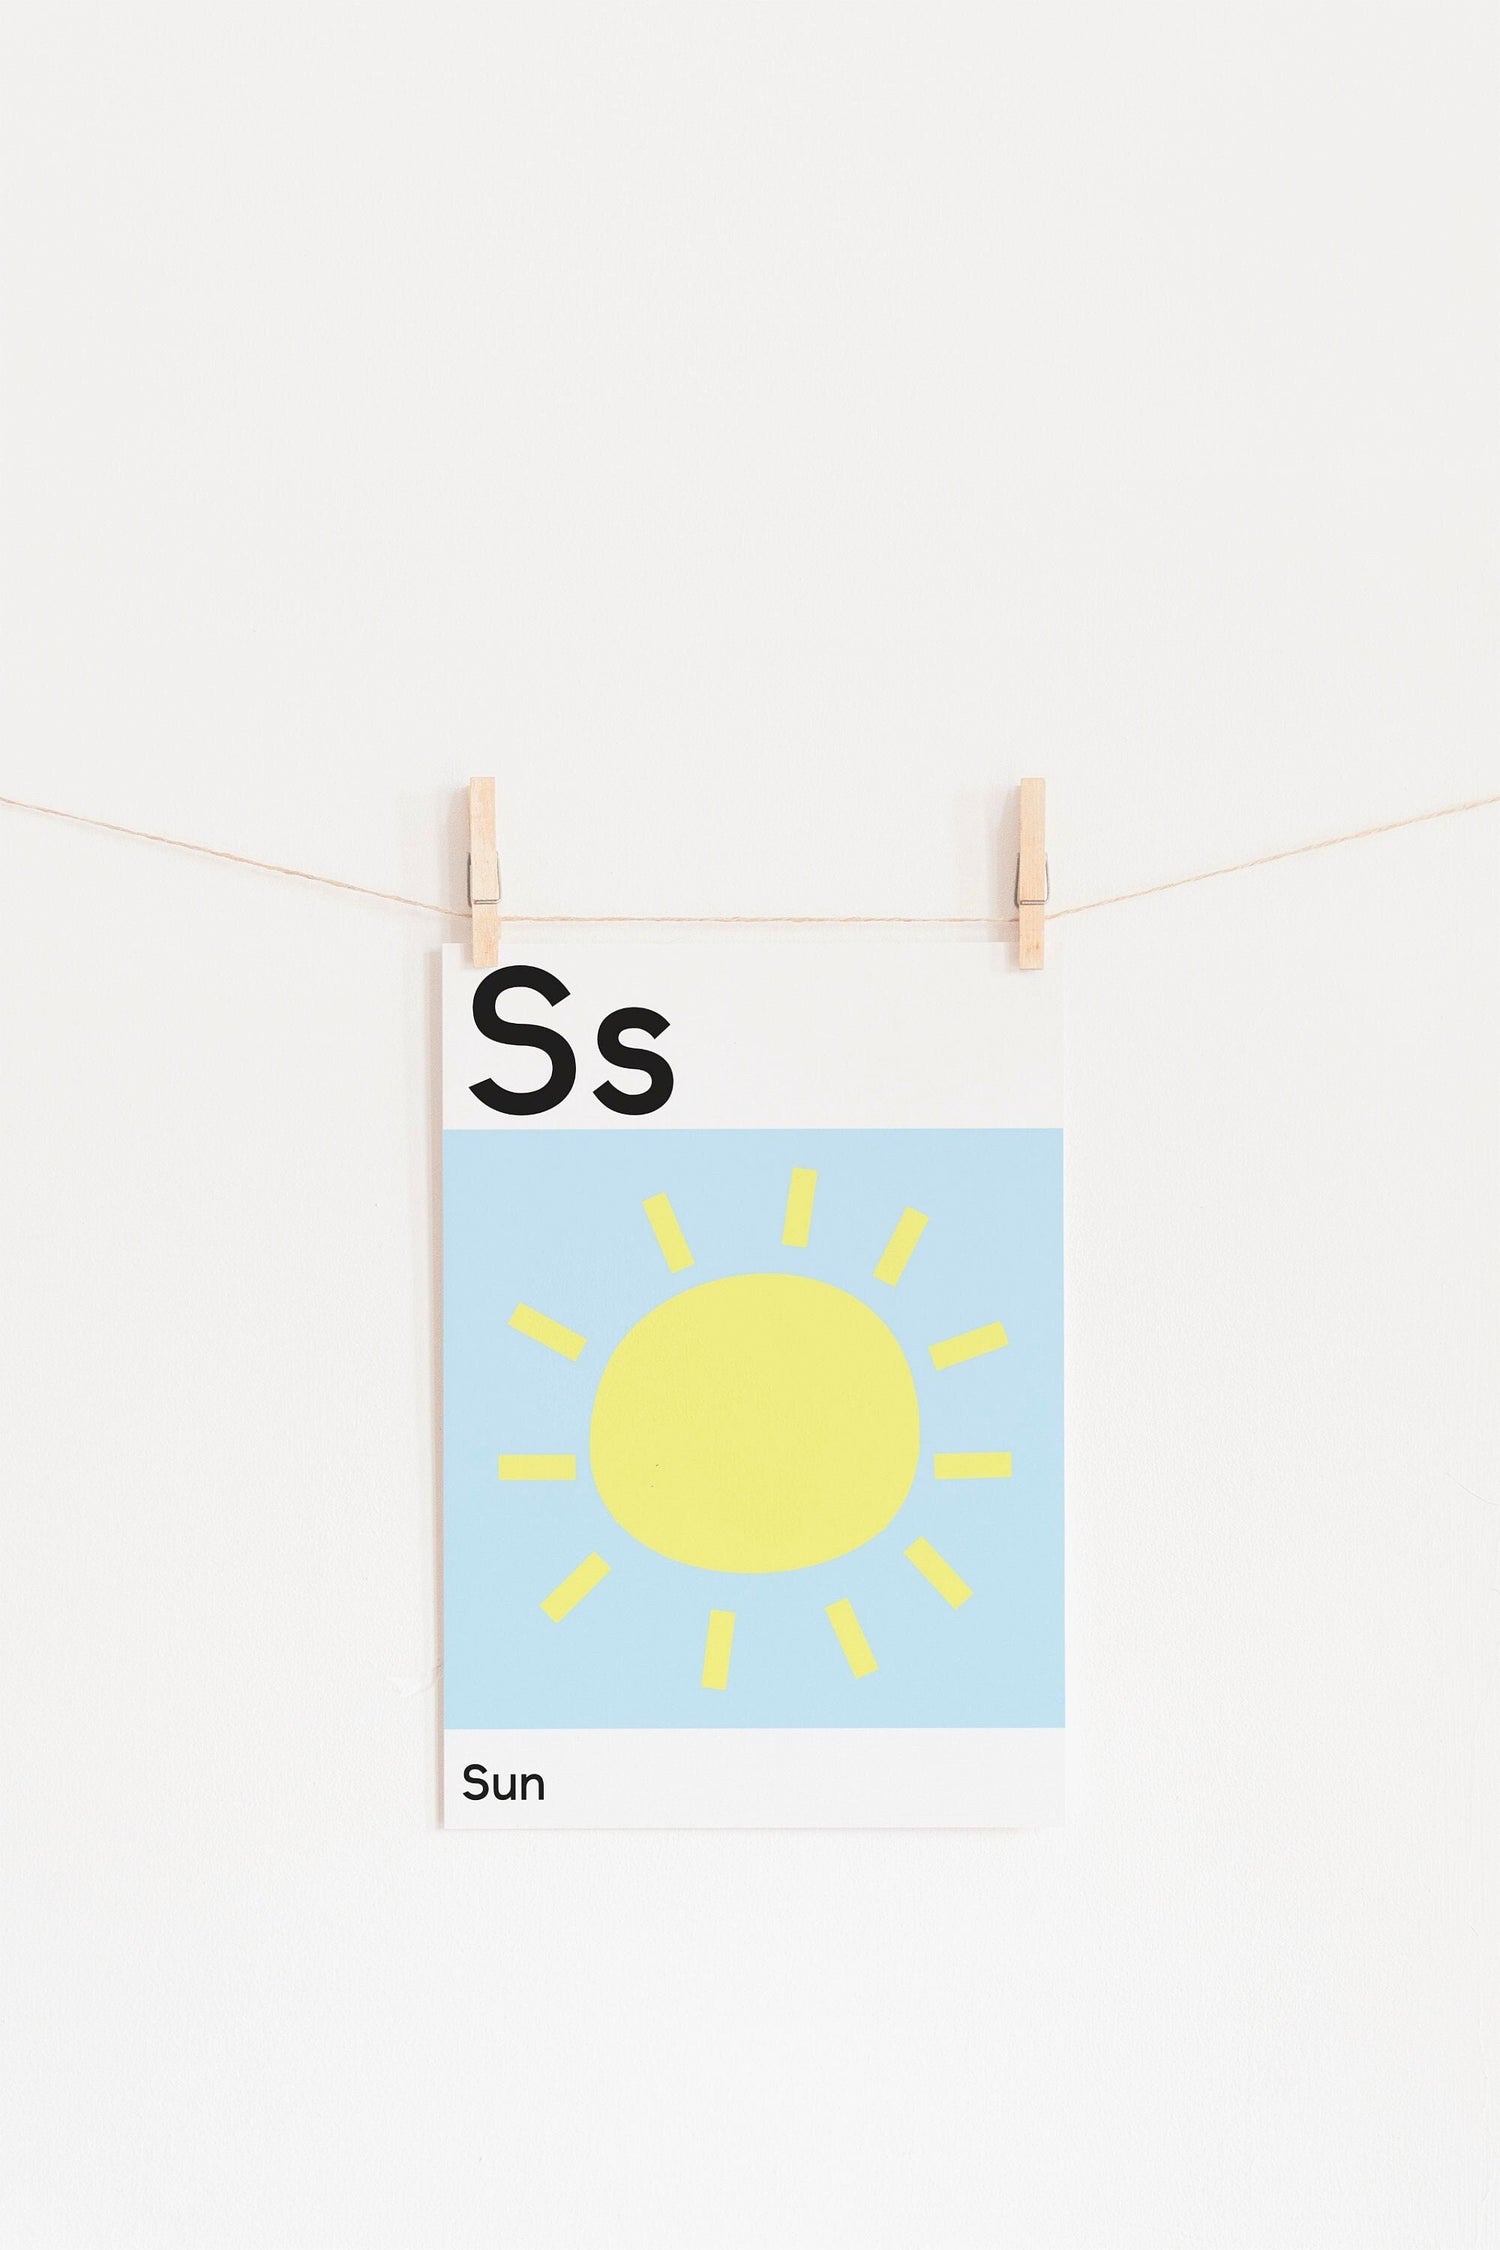 s is for sun print